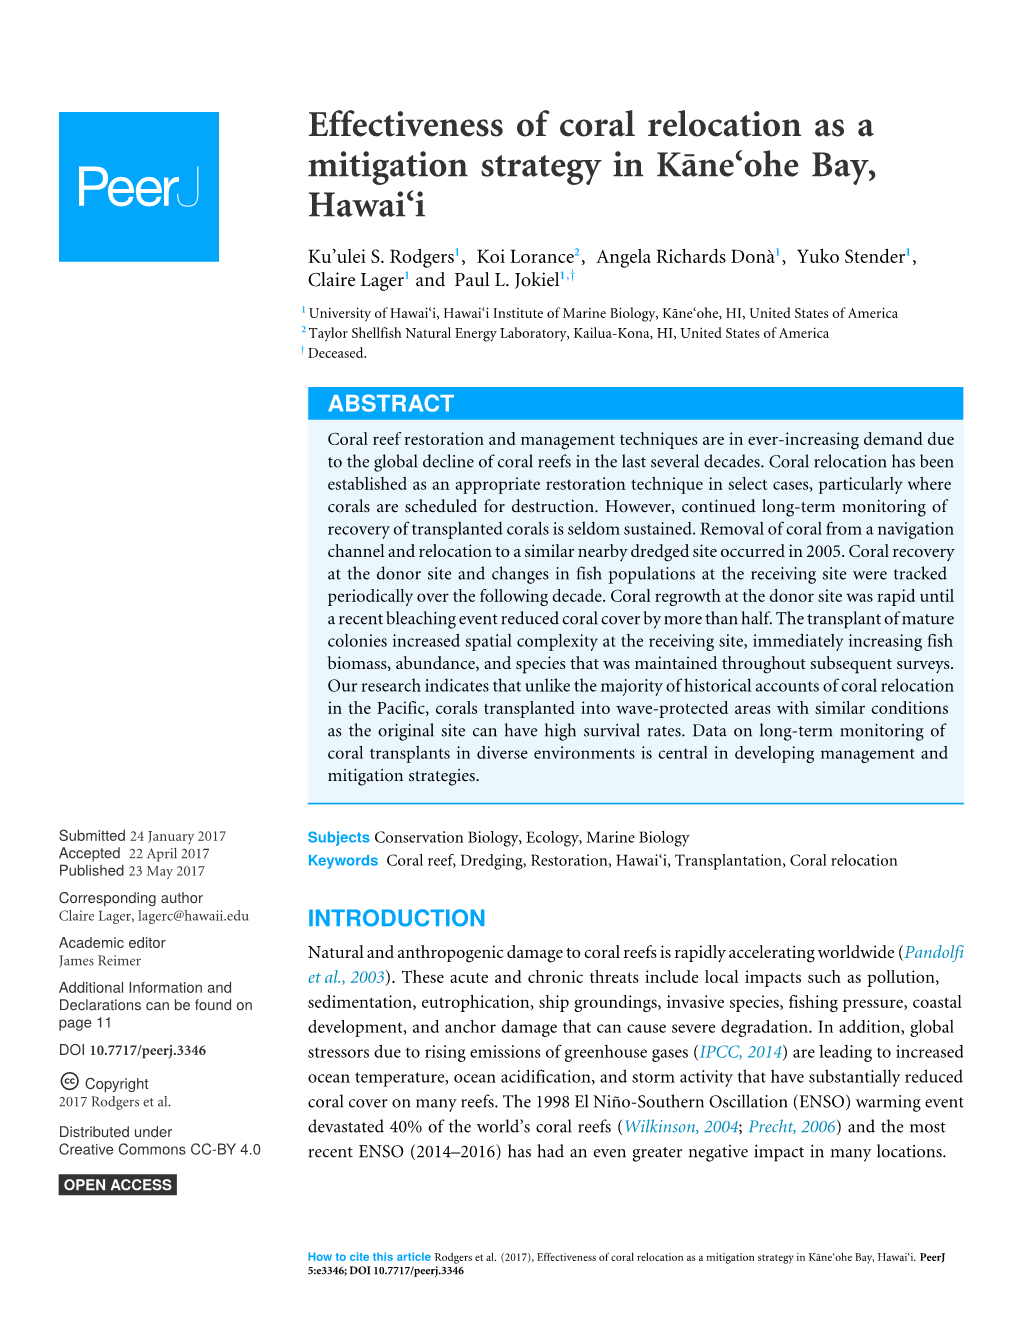 Effectiveness of Coral Relocation As a Mitigation Strategy in K¯Ane'ohe